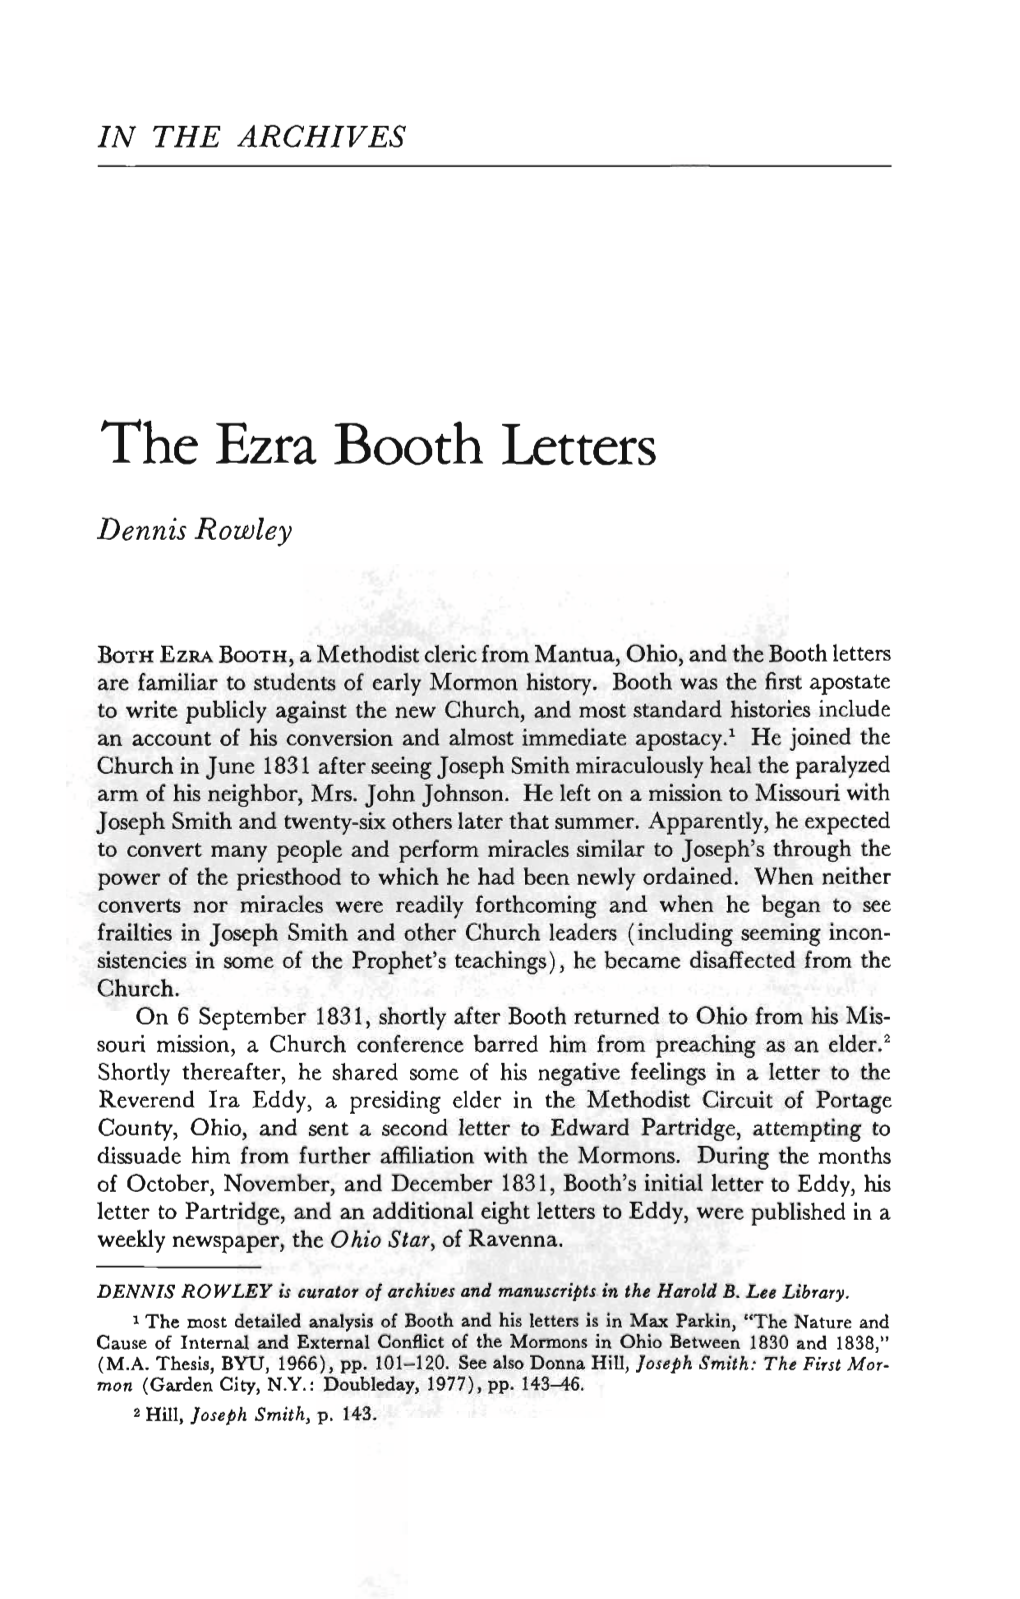 The Ezra Booth Letters